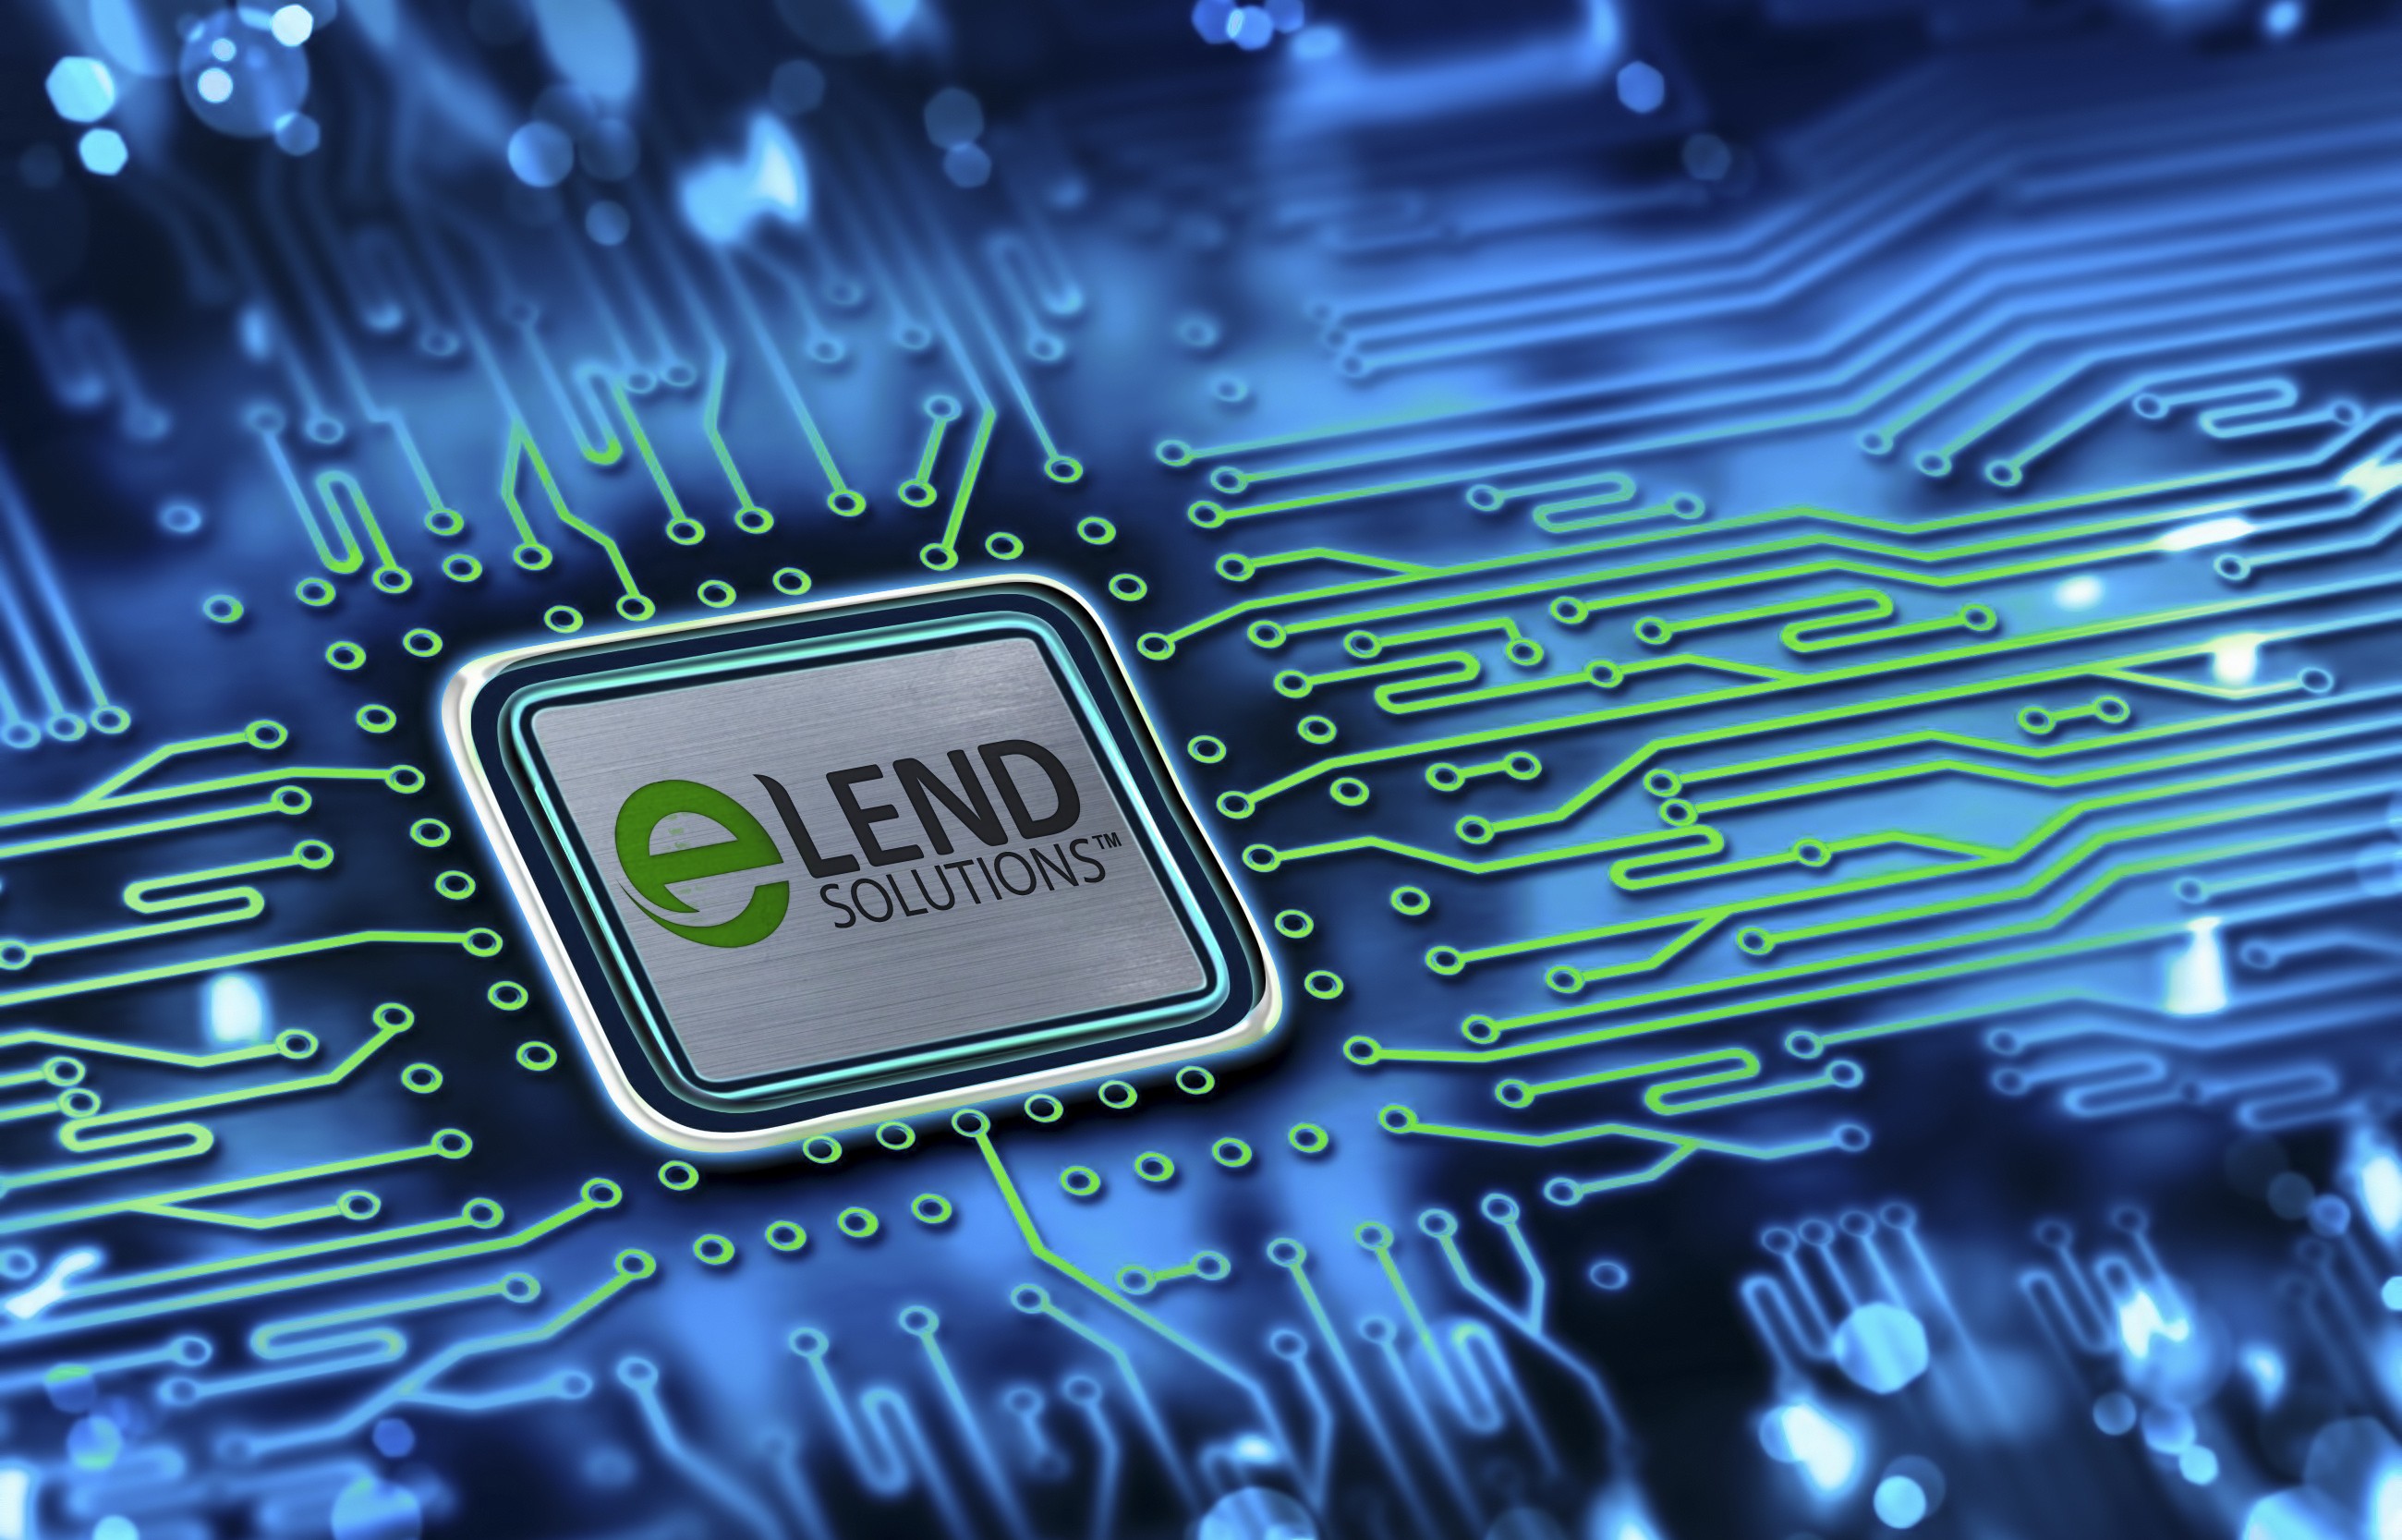 eLEND Solutions